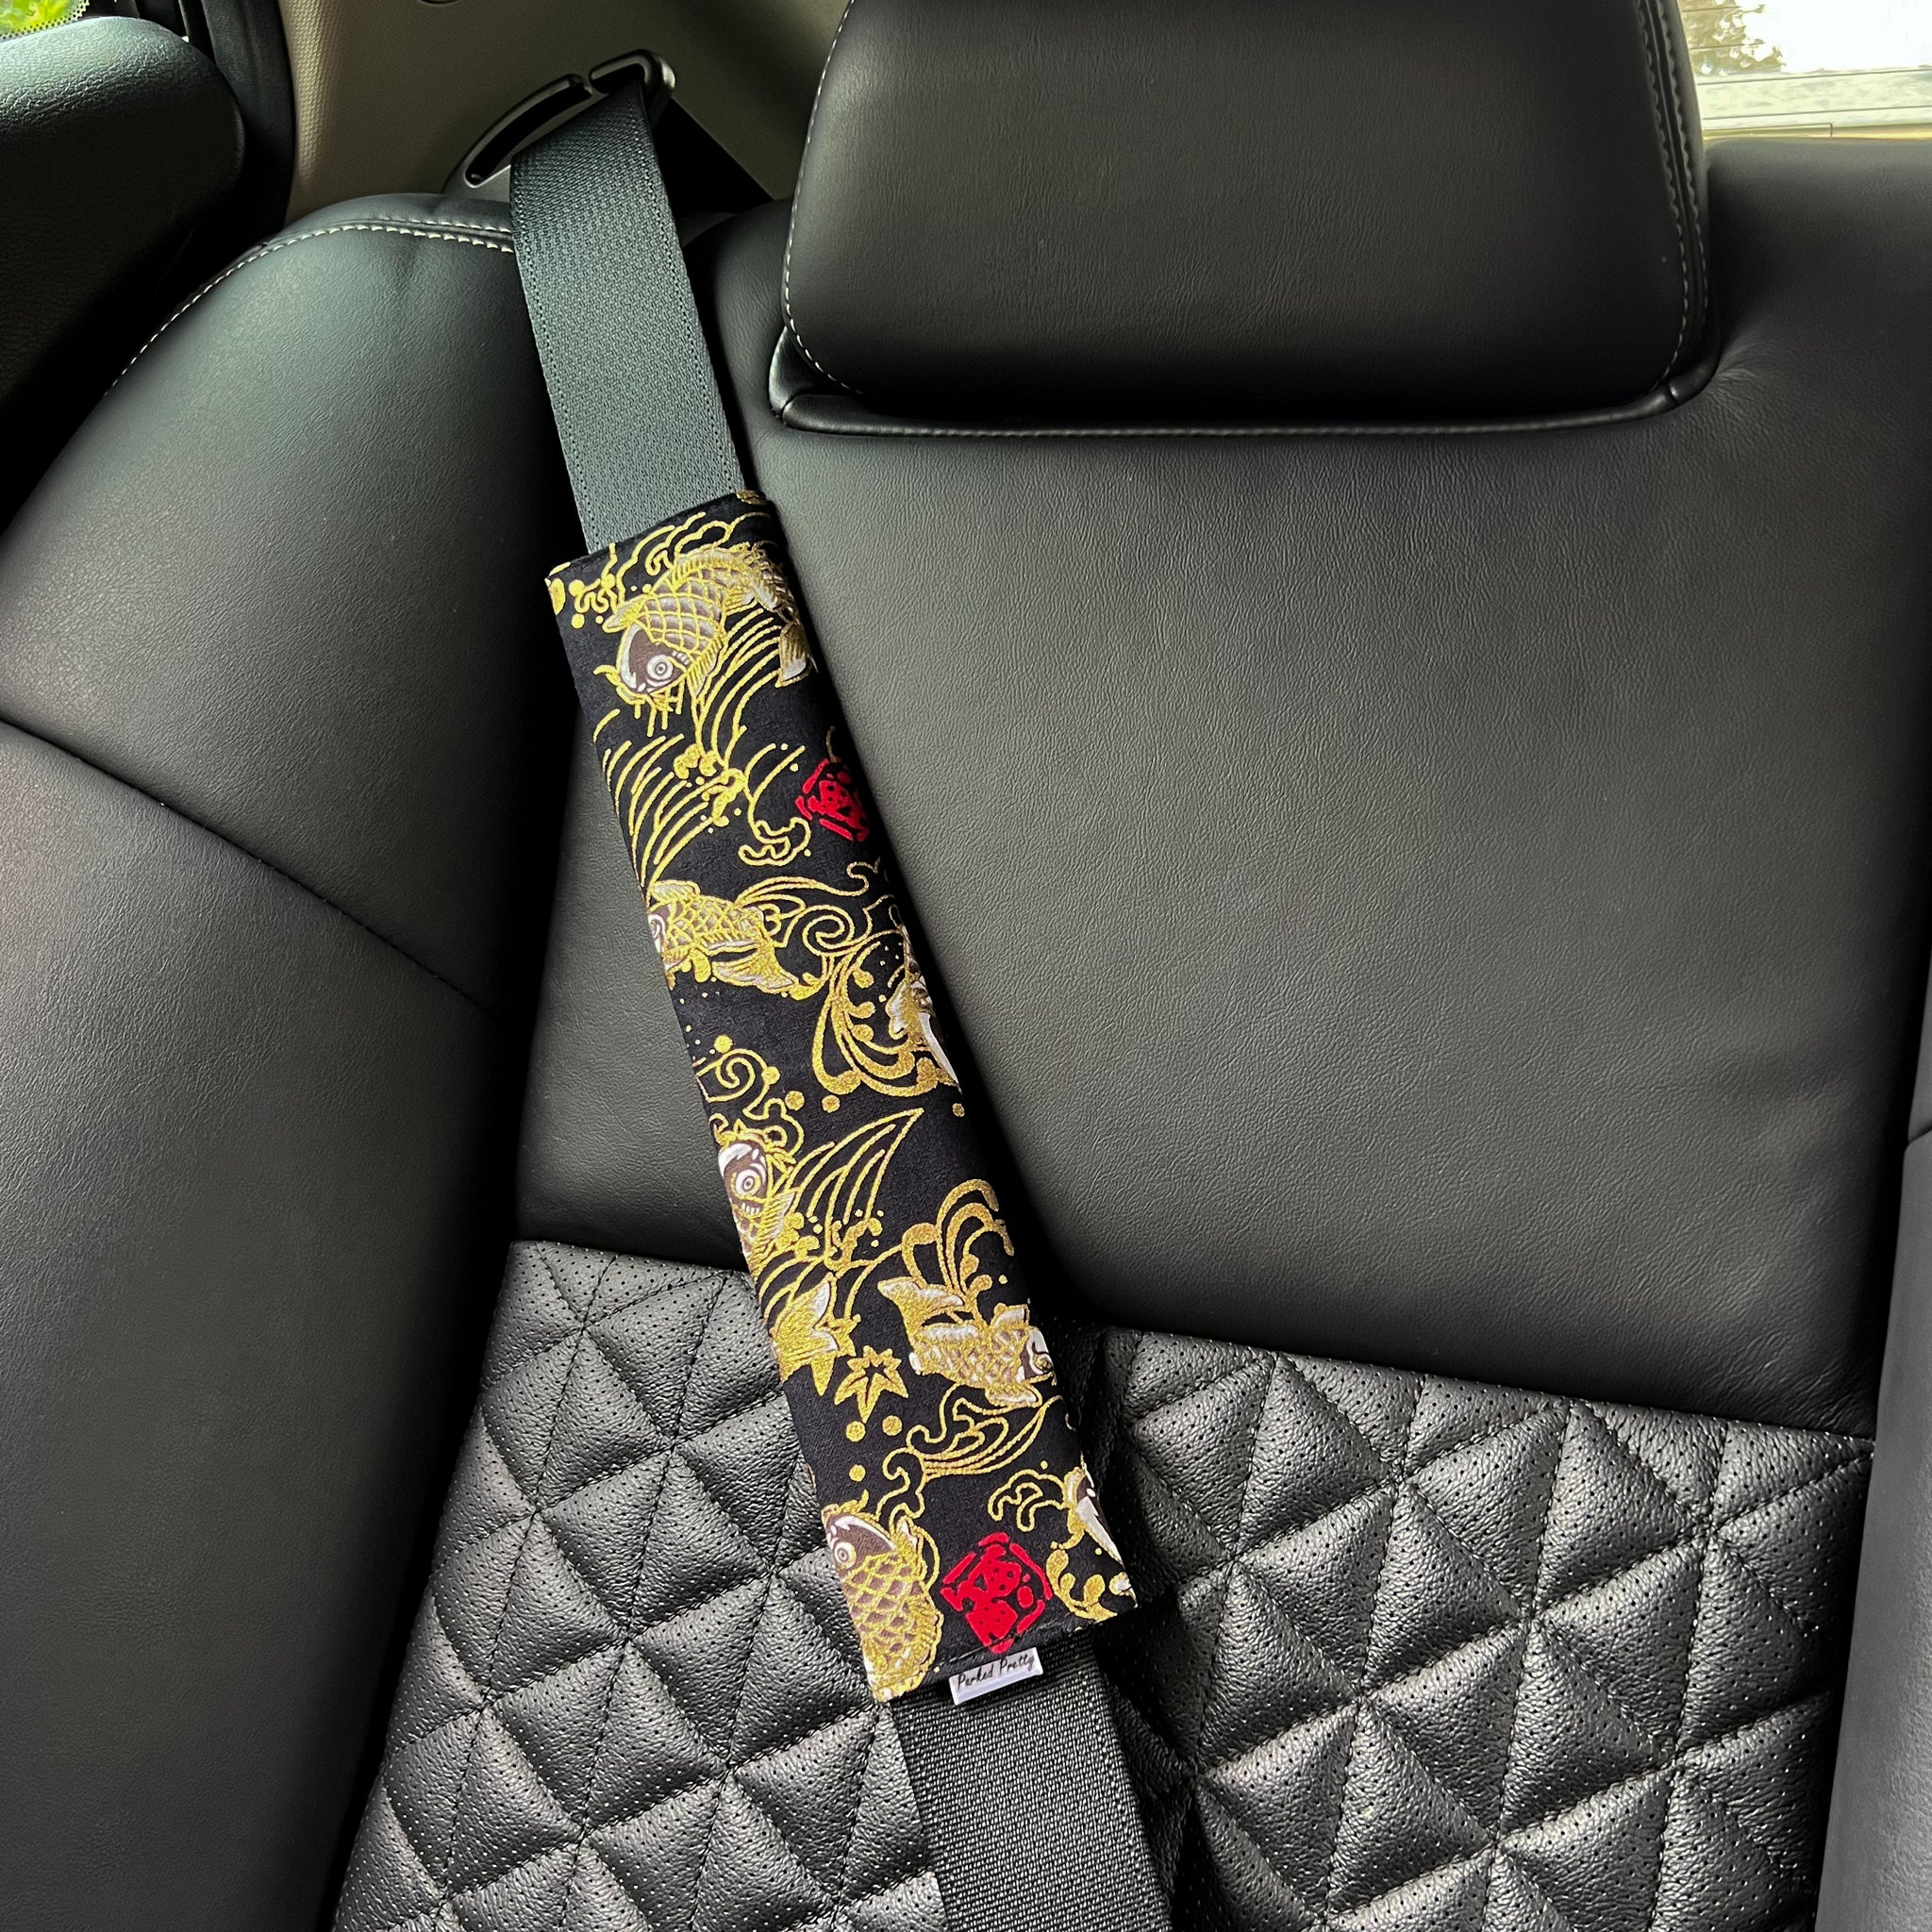 jdm parked pretty seat belt covers